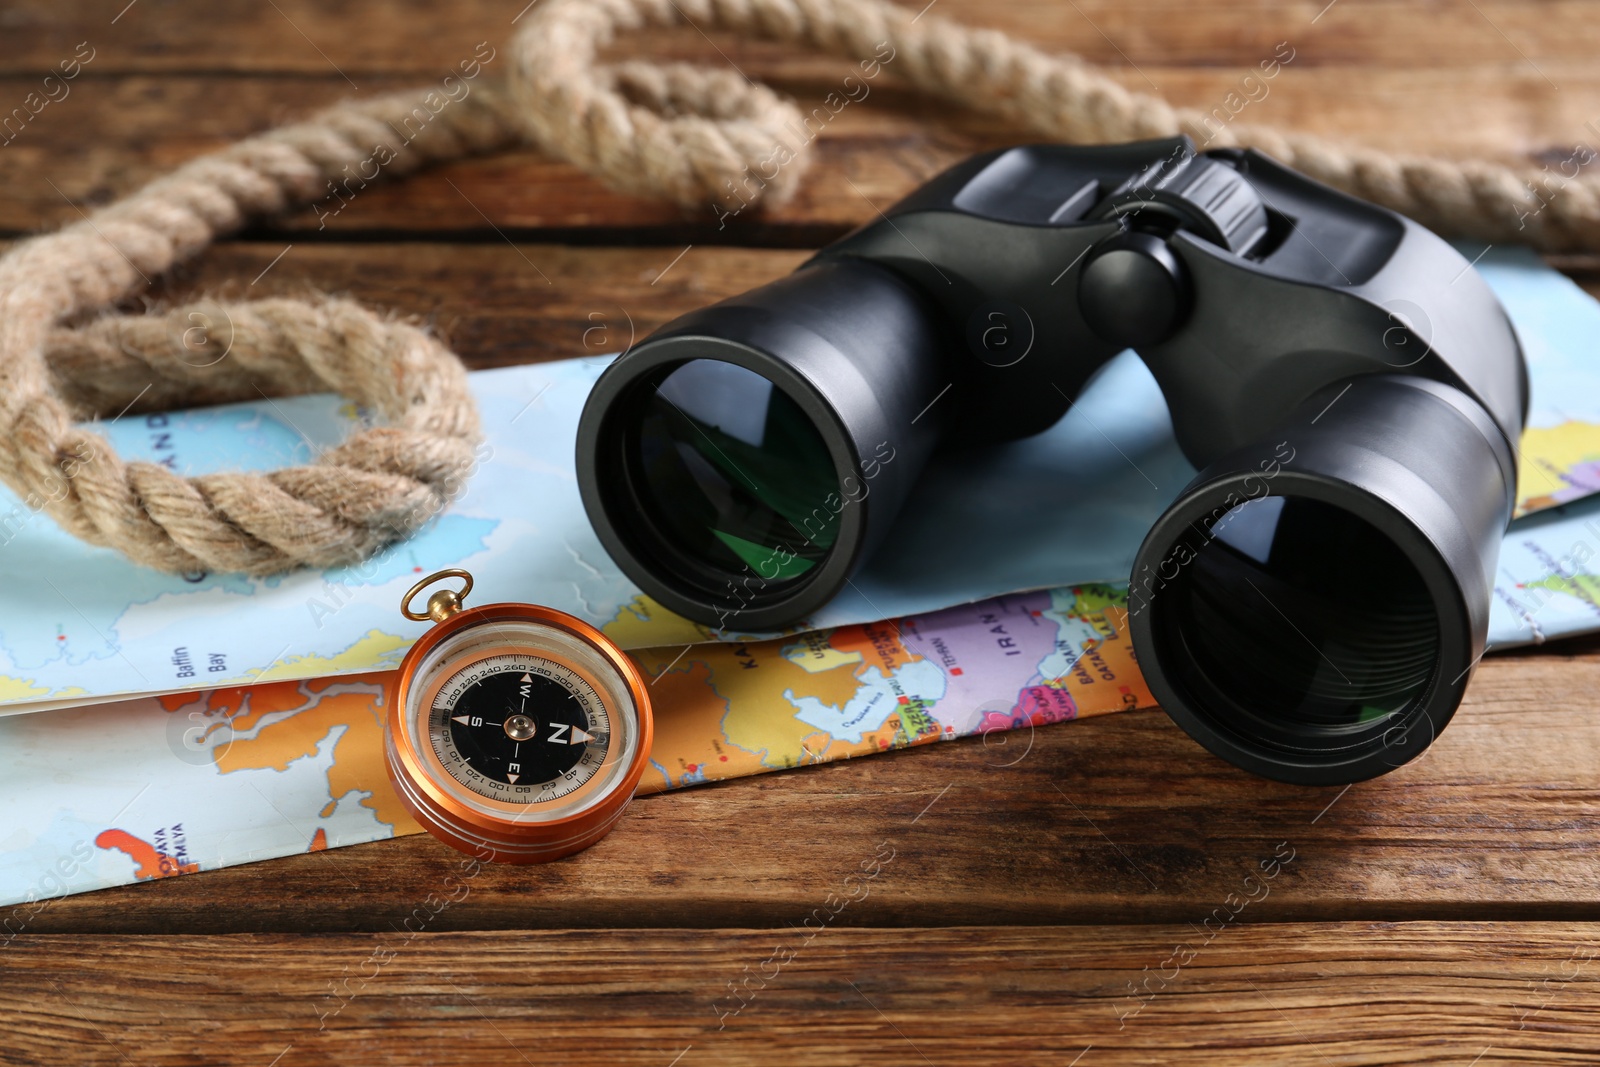 Photo of Modern binoculars, map, compass and rope on wooden table, closeup